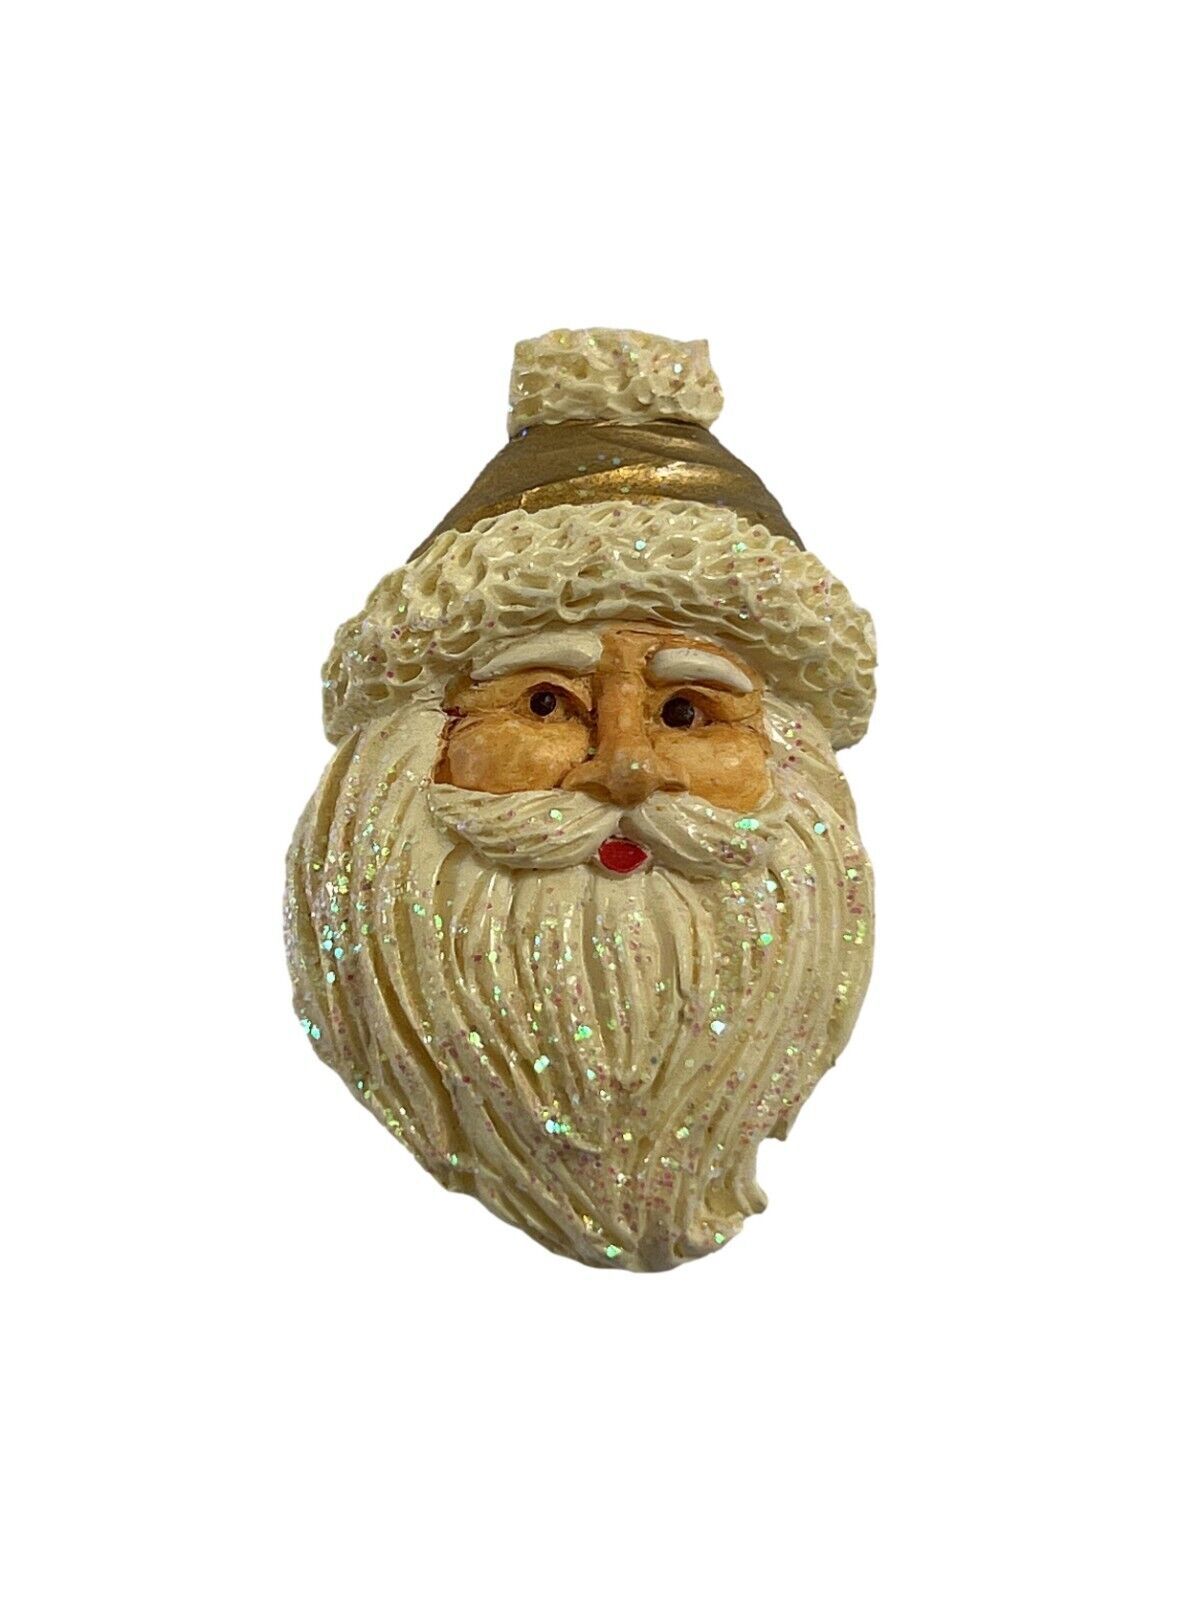 Primary image for Vintage Hard Resin Santa Claus Brooch Pin Christmas Sparkly Holiday